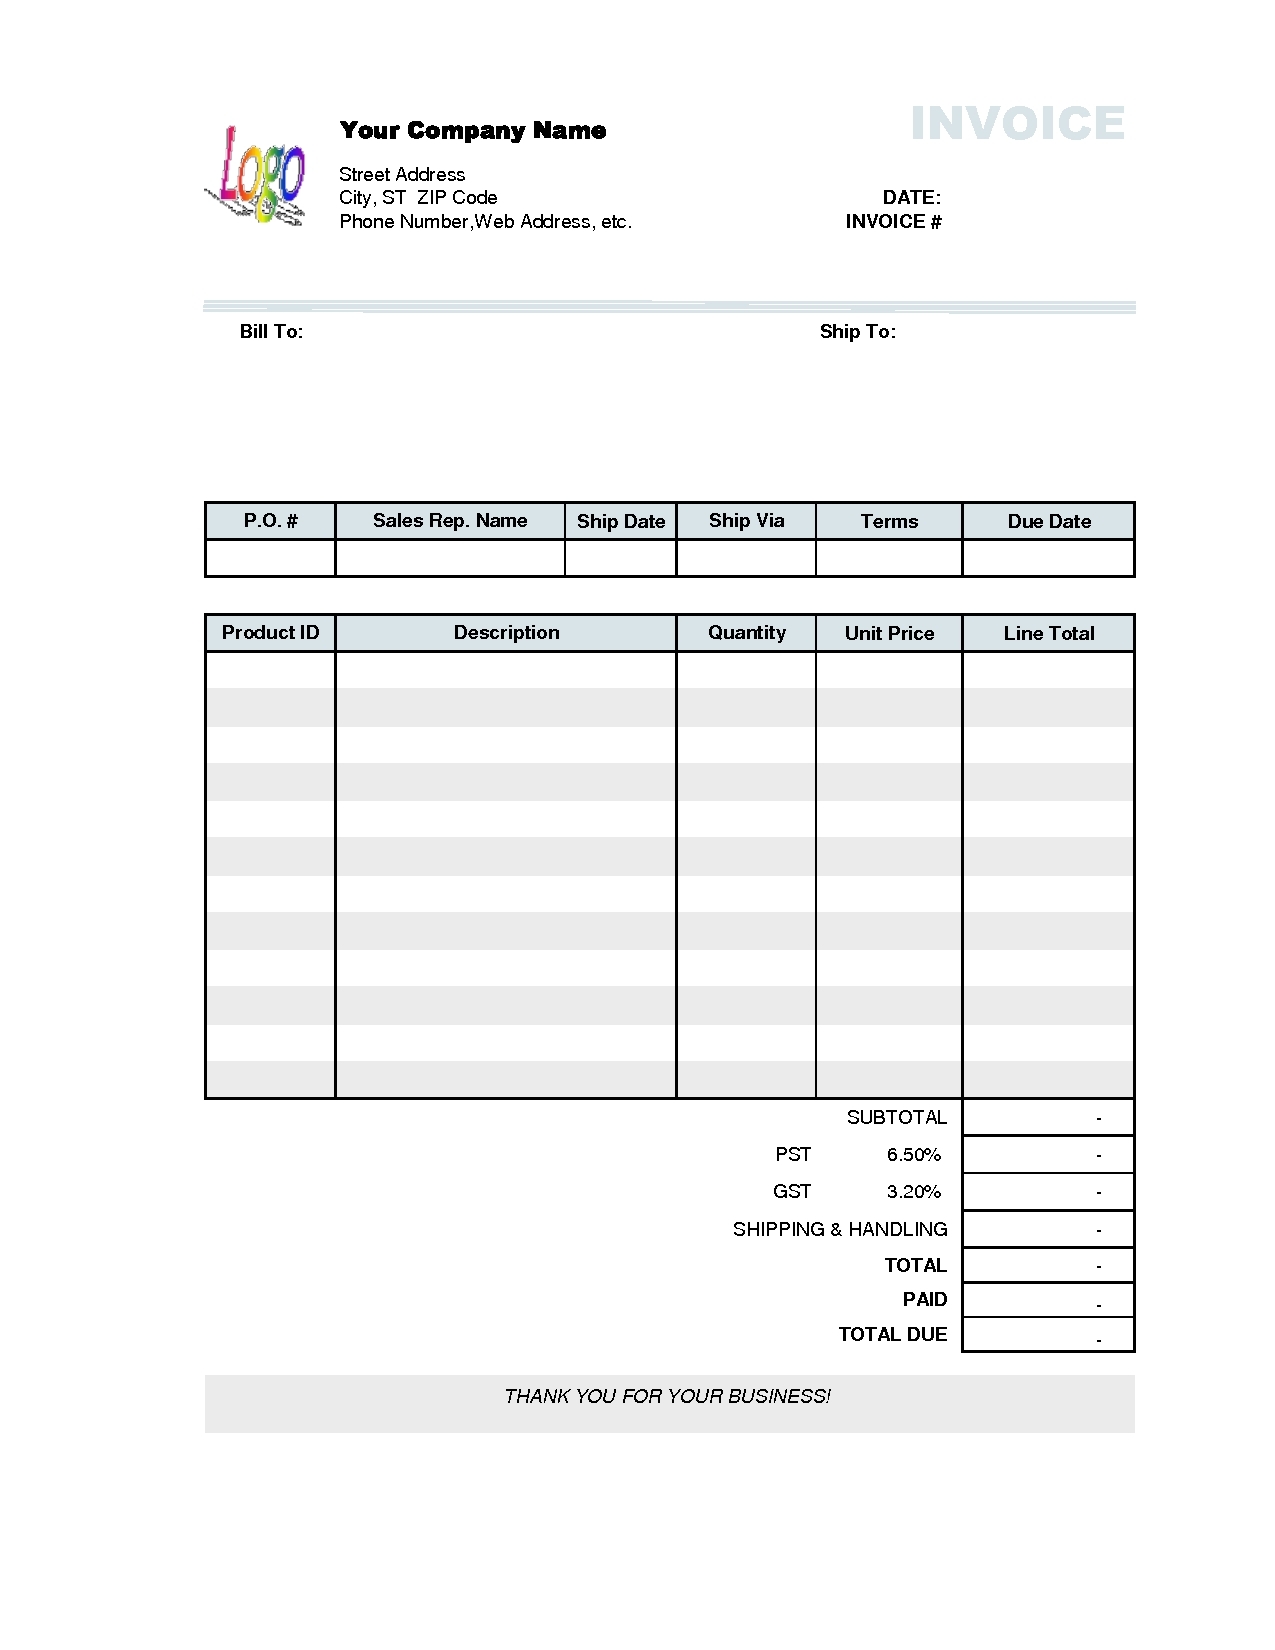 online invoice template free invoice template free 2016 online invoice template